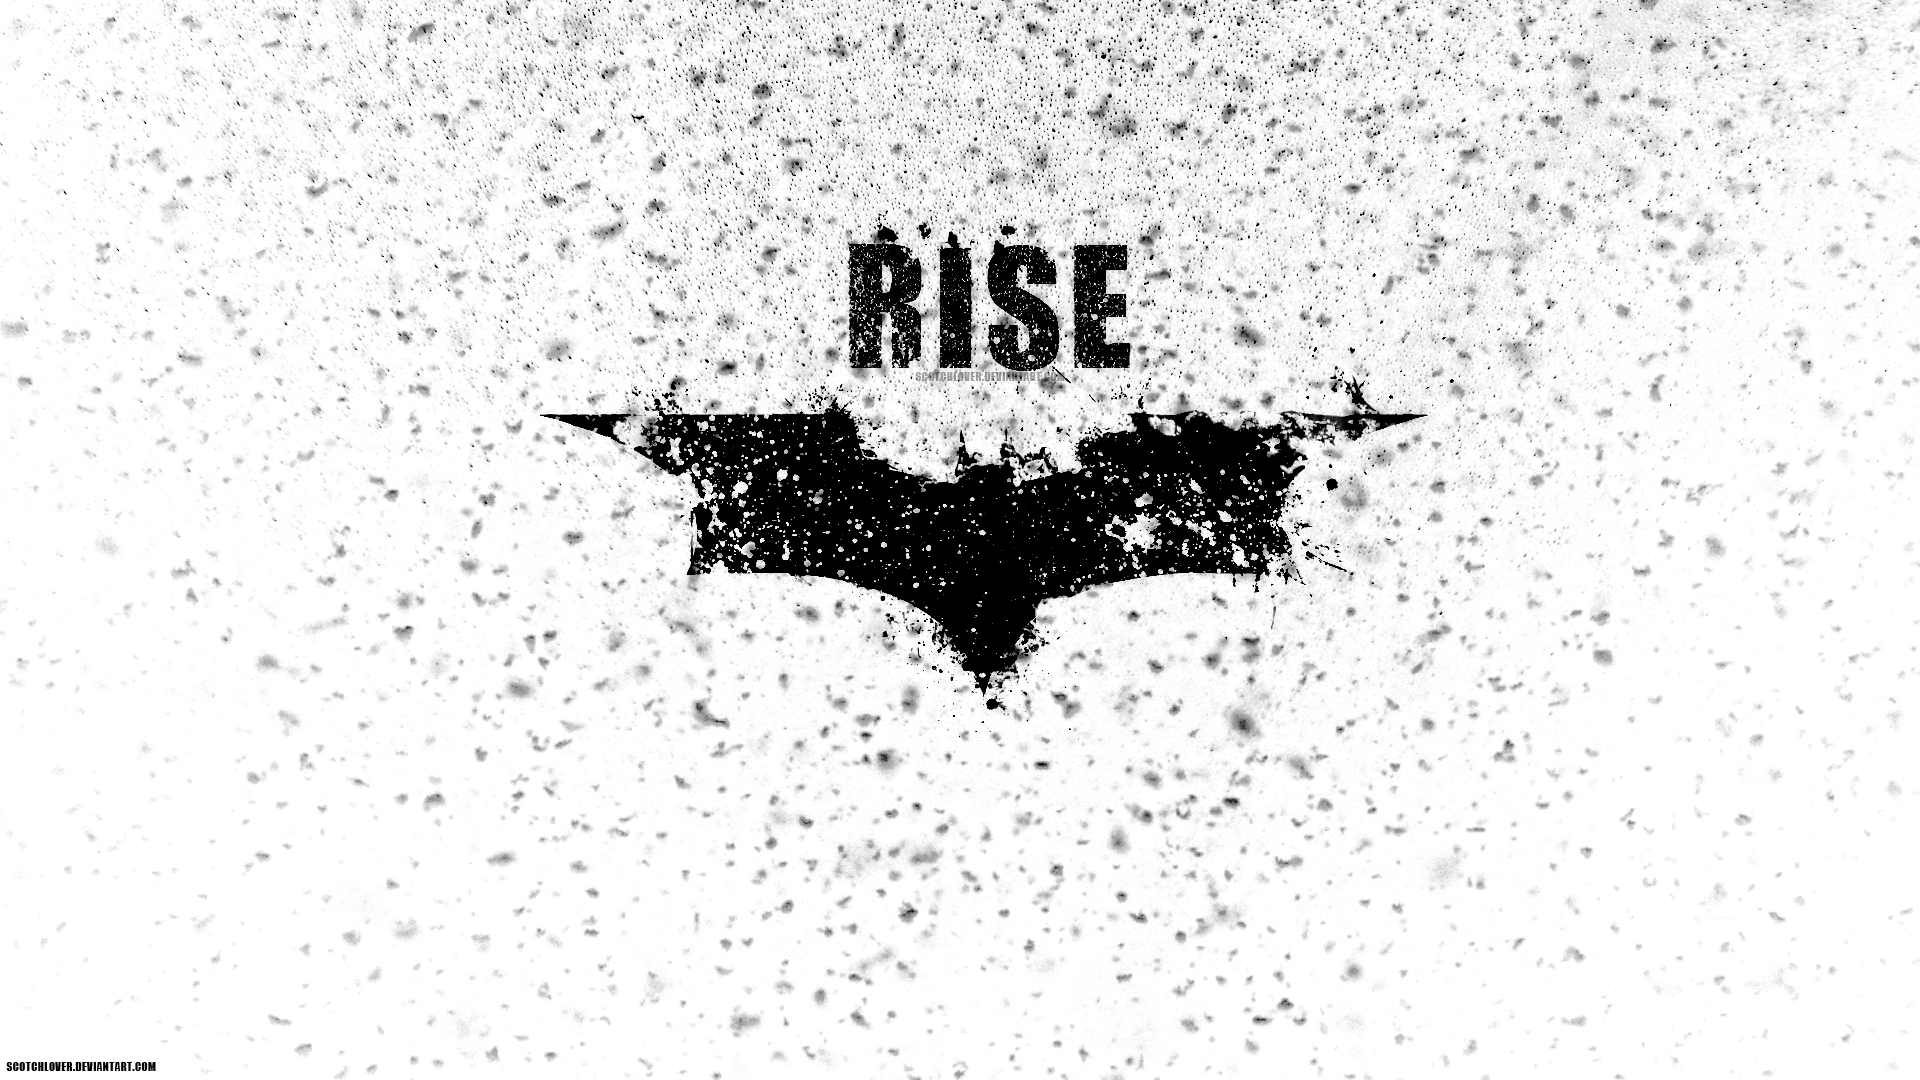 Dark Knight Rises « Awesome Wallpapers